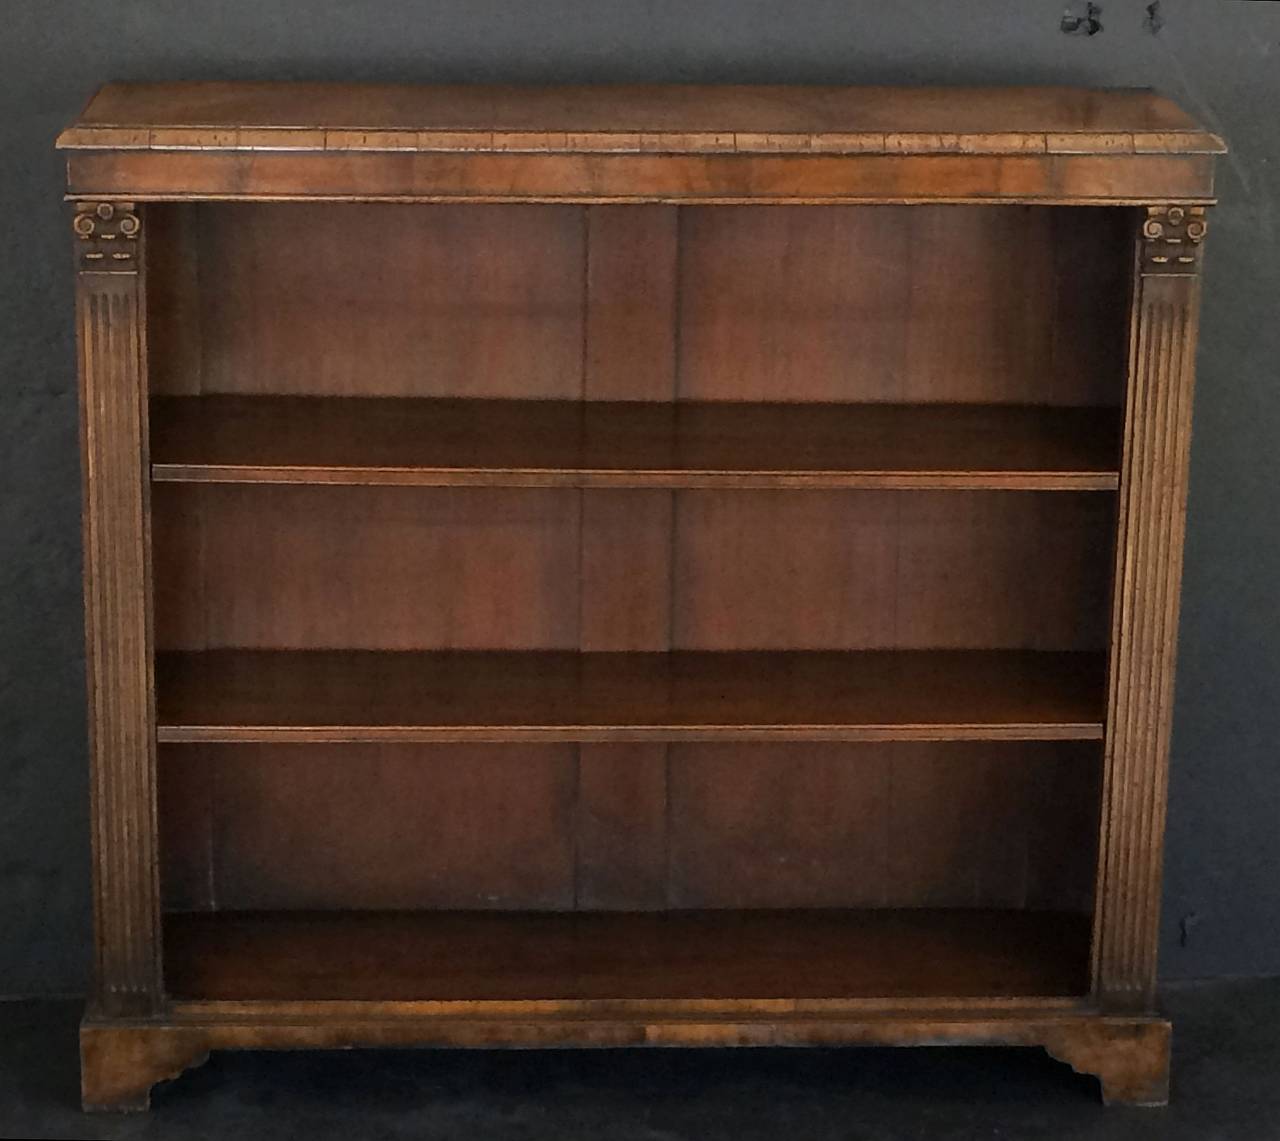 A fine English open bookcase of figured walnut, featuring a moulded top upon a case with two carved Classical reeded column sides, two adjustable, removable shelves, and set upon bracket feet.